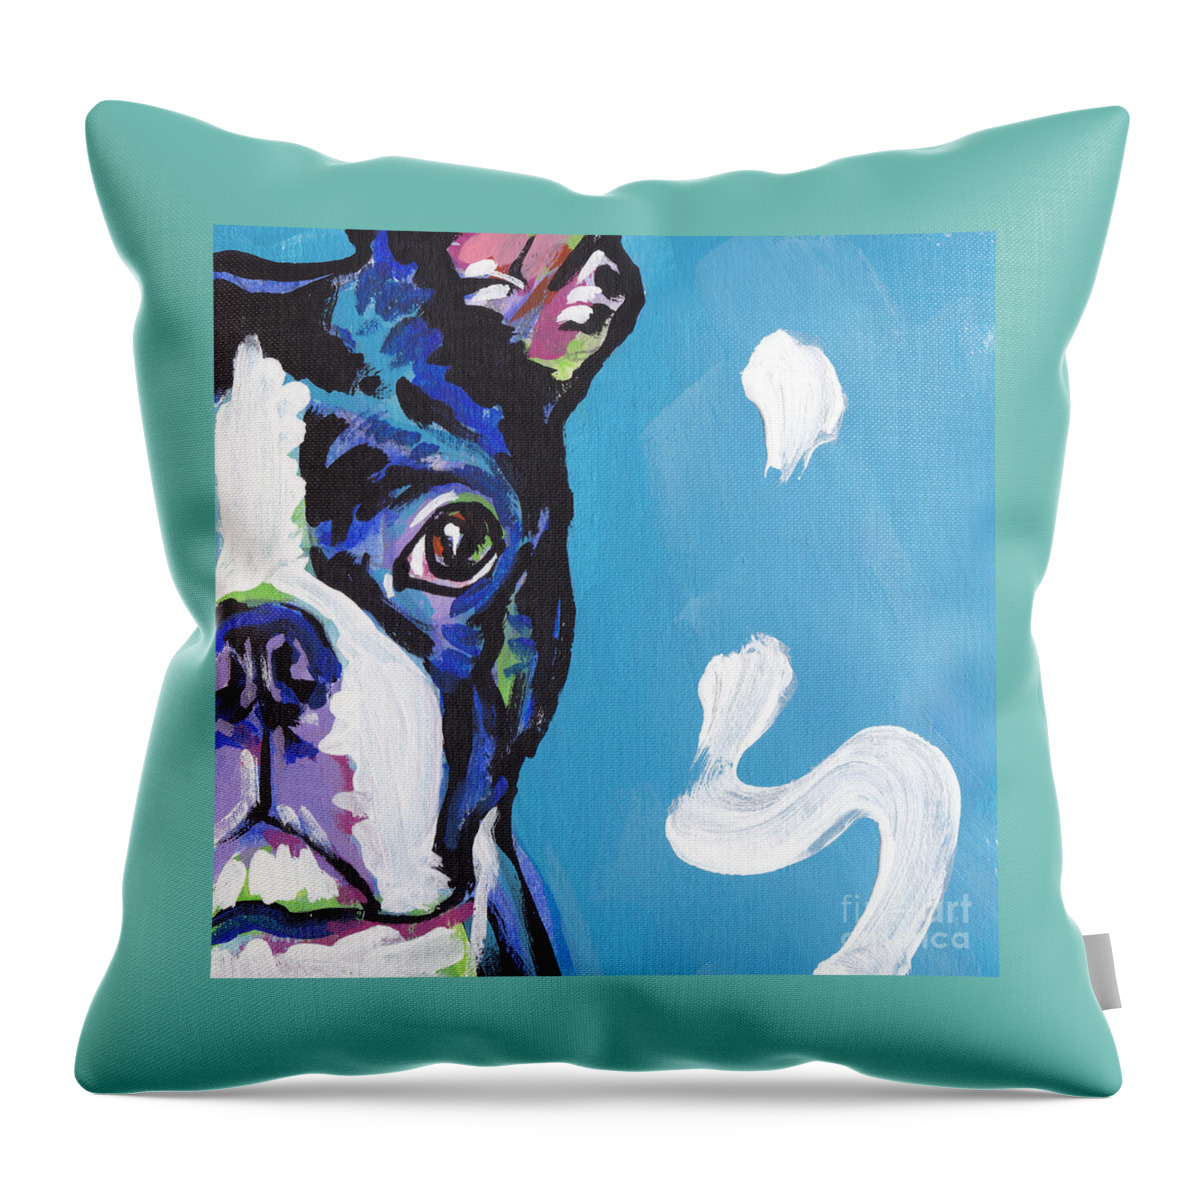 Boston Terrier Throw Pillow featuring the painting The Boss by Lea S